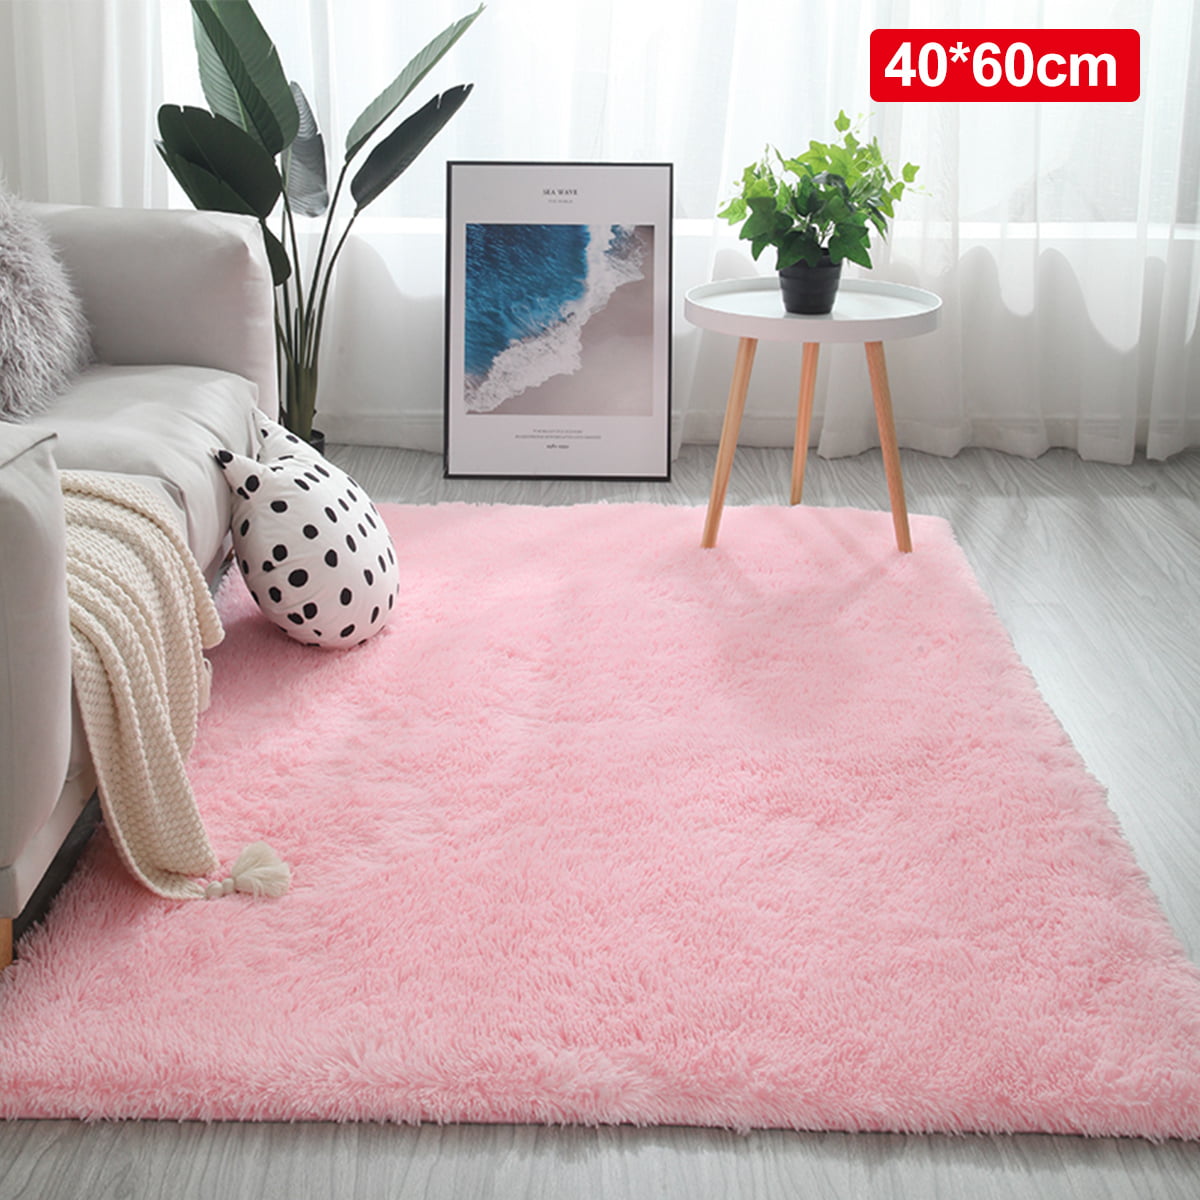 Details about   Rectangle Fluffy Rugs Anti-Skid Shaggy Area Rug Room Carpet Floor Mat Home Decor 